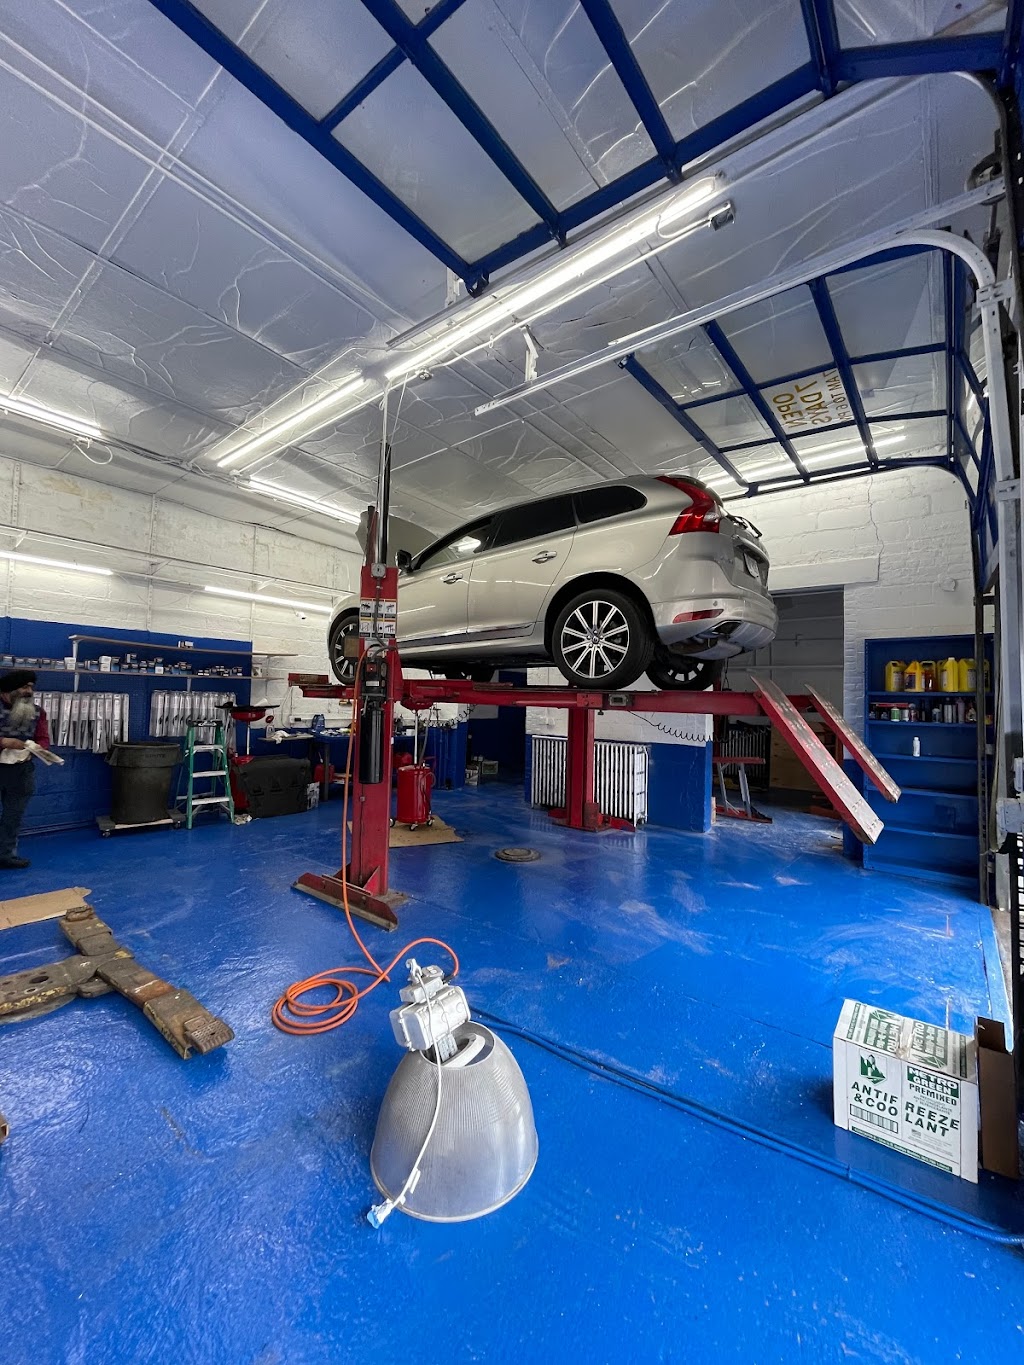 Nihaal Auto Repairs | 120 Cutter Mill Rd, Great Neck, NY 11021 | Phone: (516) 407-3111